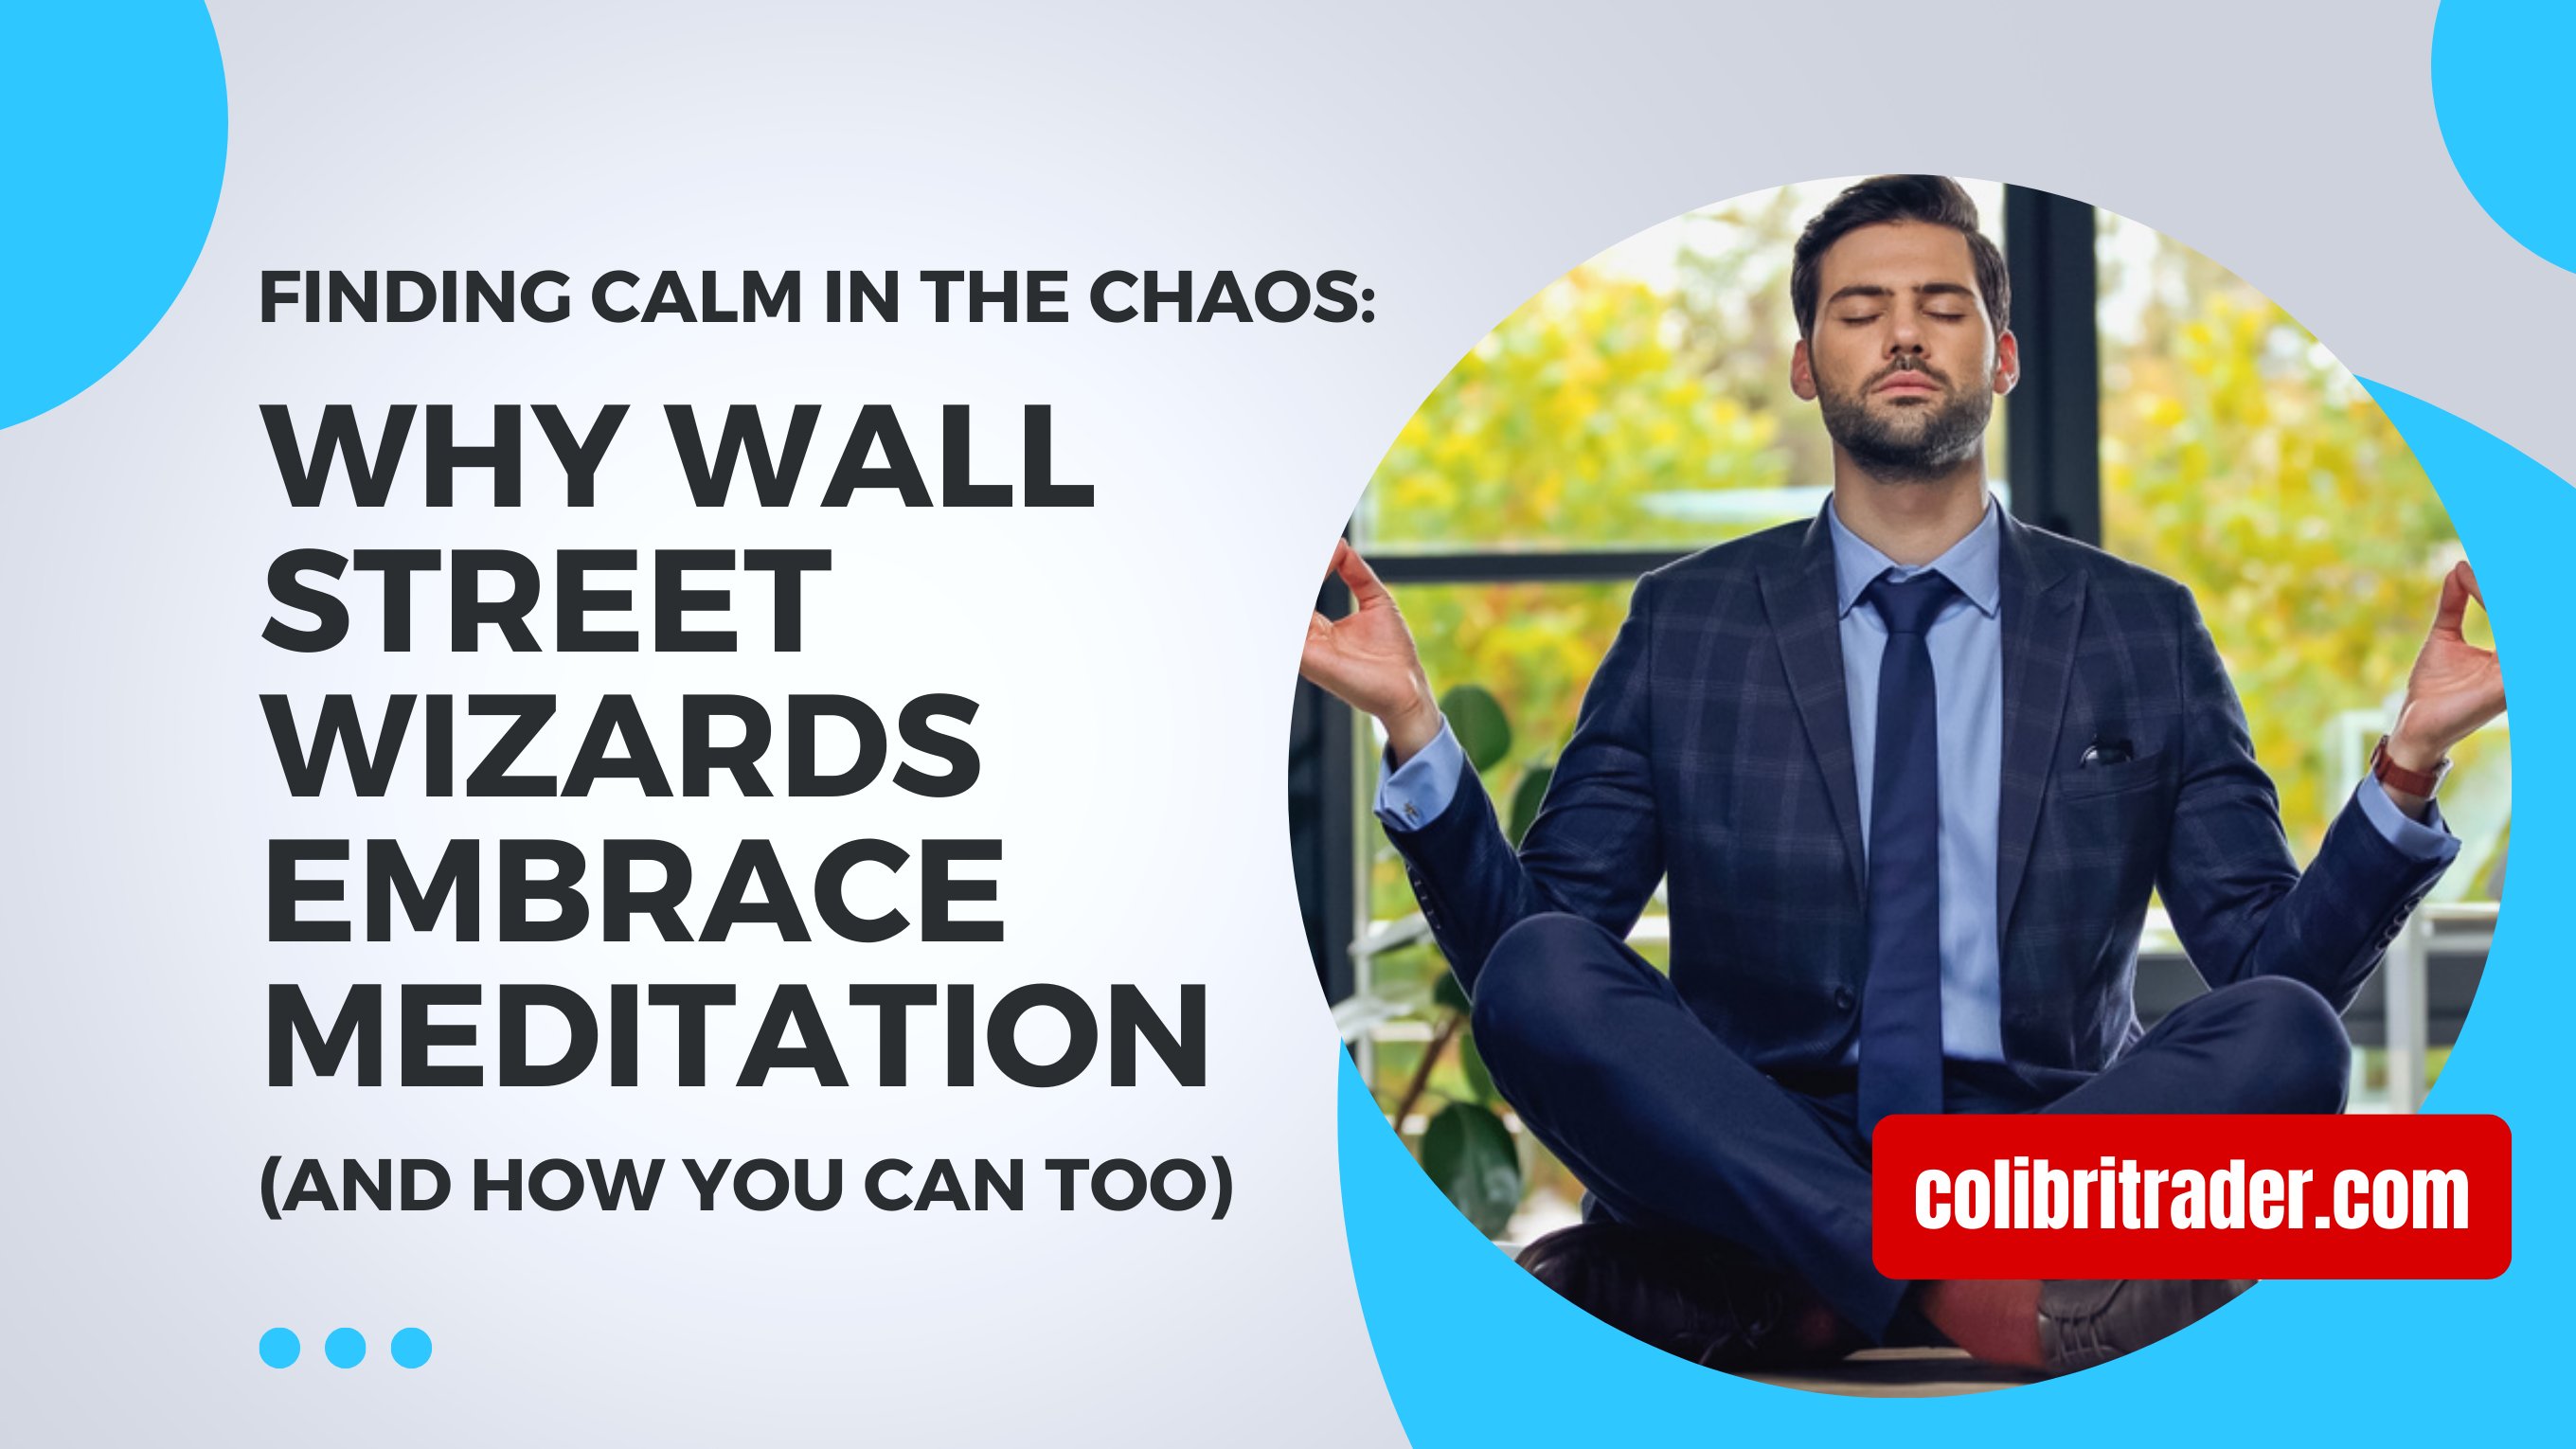 Finding Calm in the Chaos: Why Wall Street Wizards Embrace Meditation (and How You Can Too)